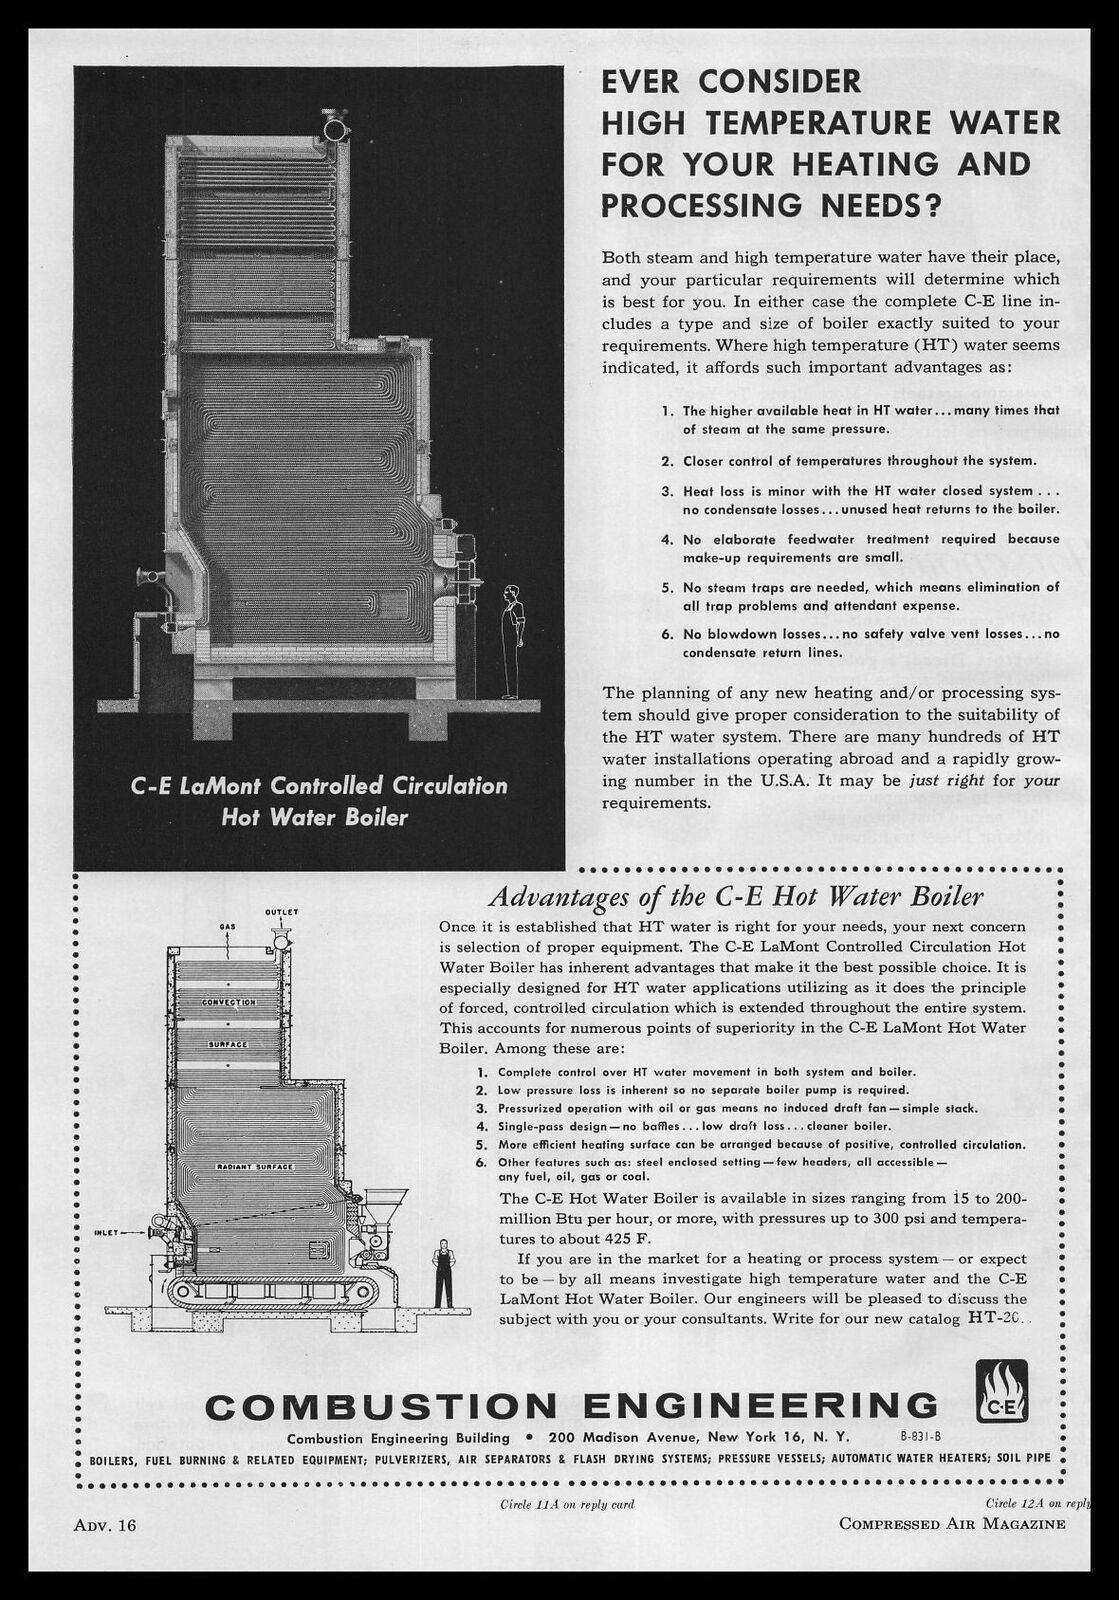 1955 Combustion Engineering LaMont High Temperature Hot Water Boiler Print Ad